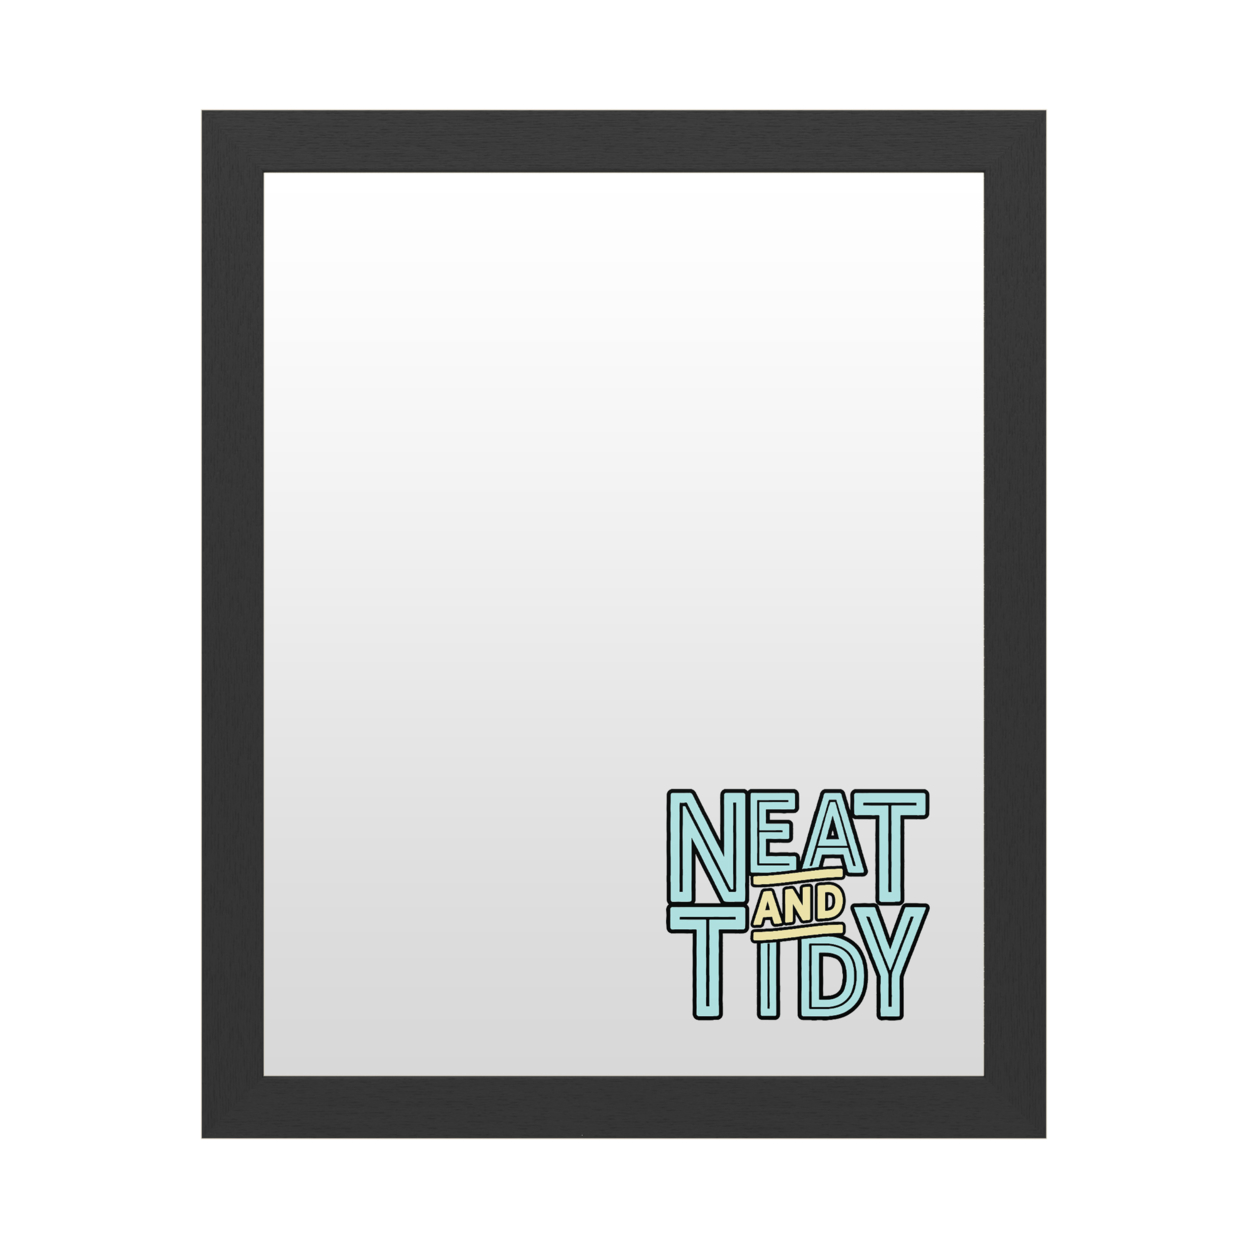 Dry Erase 16 X 20 Marker Board With Printed Artwork - Neat And Tidy Blue White Board - Ready To Hang